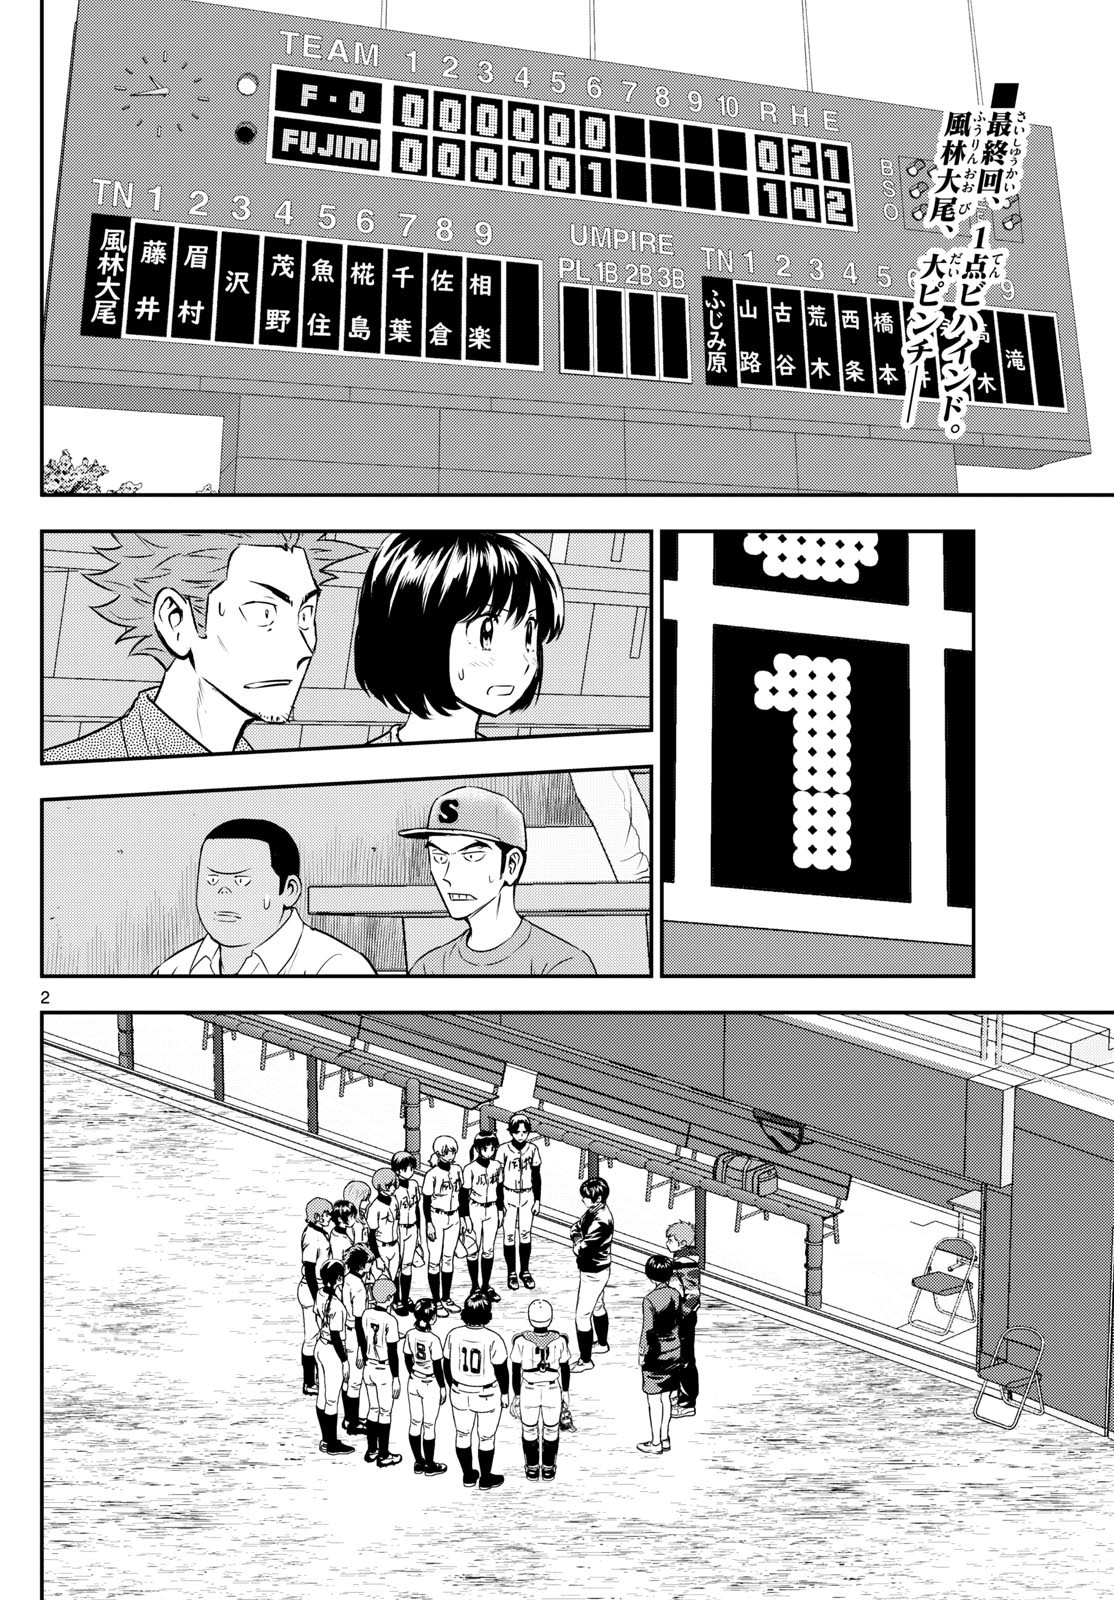 Major 2nd - メジャーセカンド - Chapter 274 - Page 2